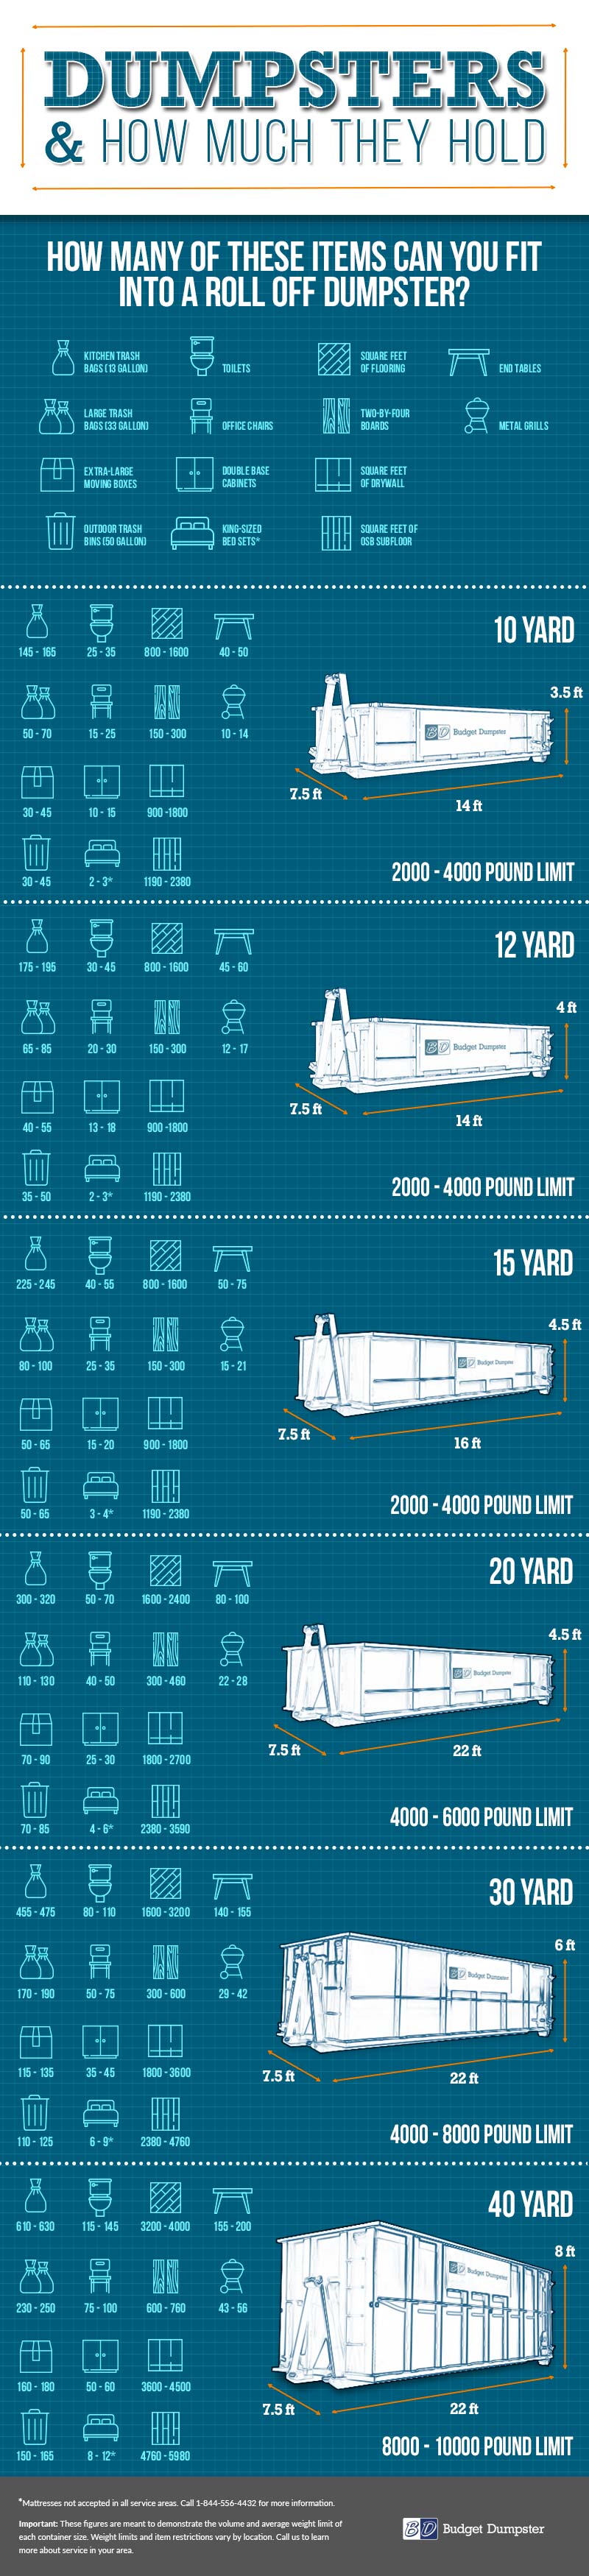 Infographic Comparing Dumpster Rental Dimensions and What Can Fit in Them